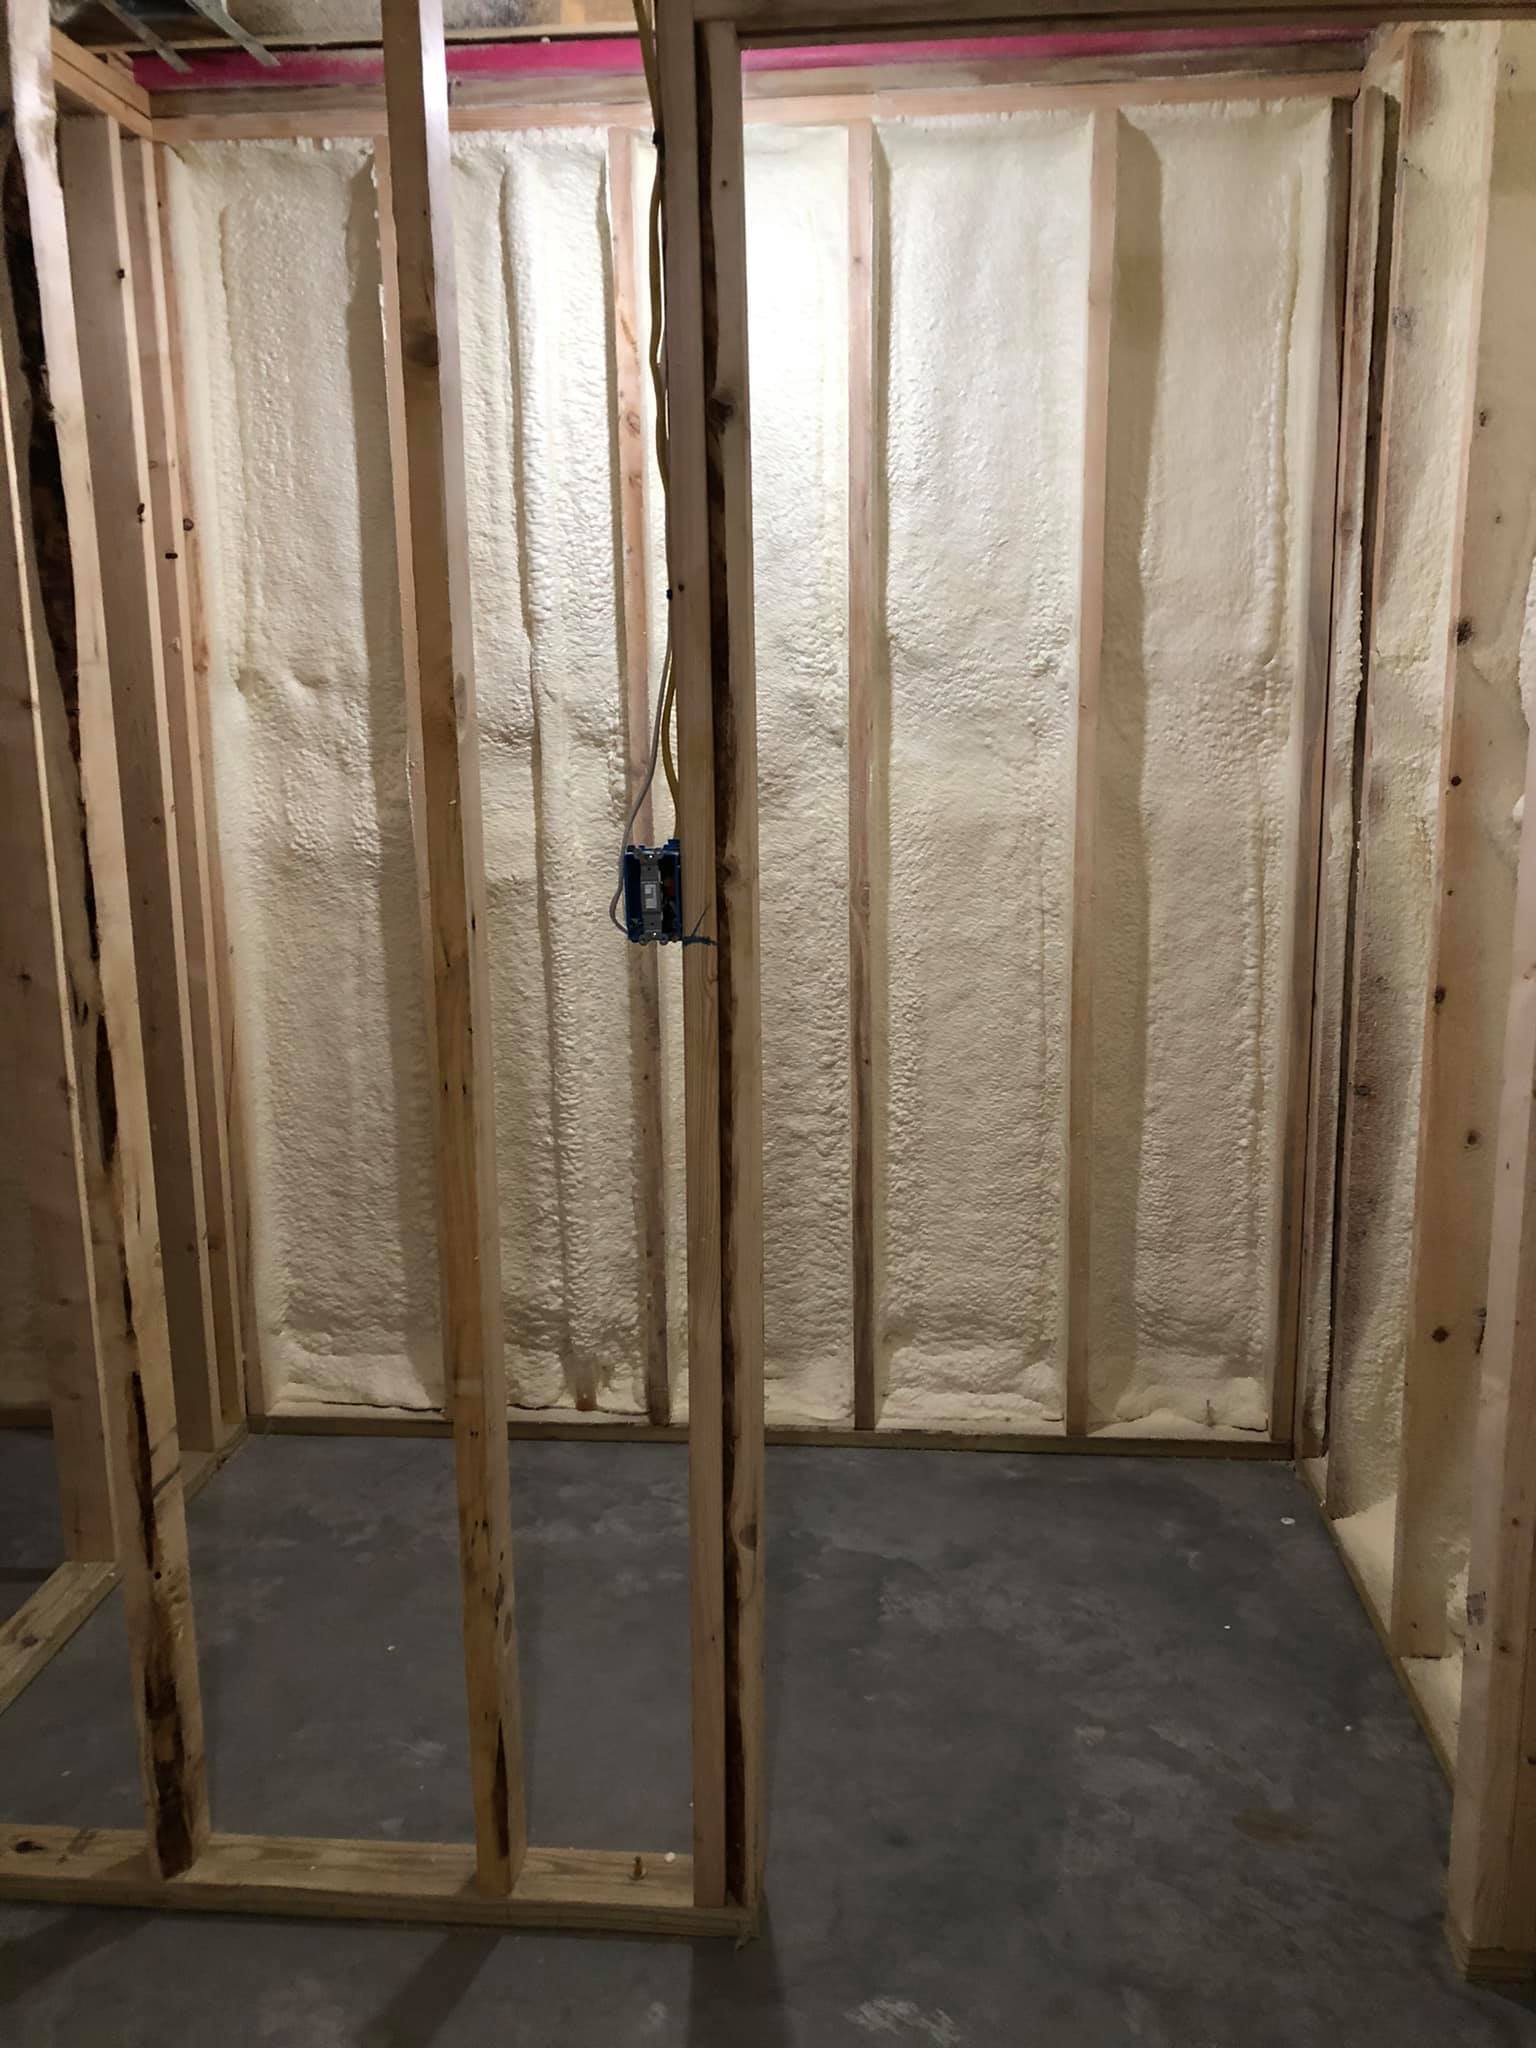 Closed Cell Spray Foam For The Win!